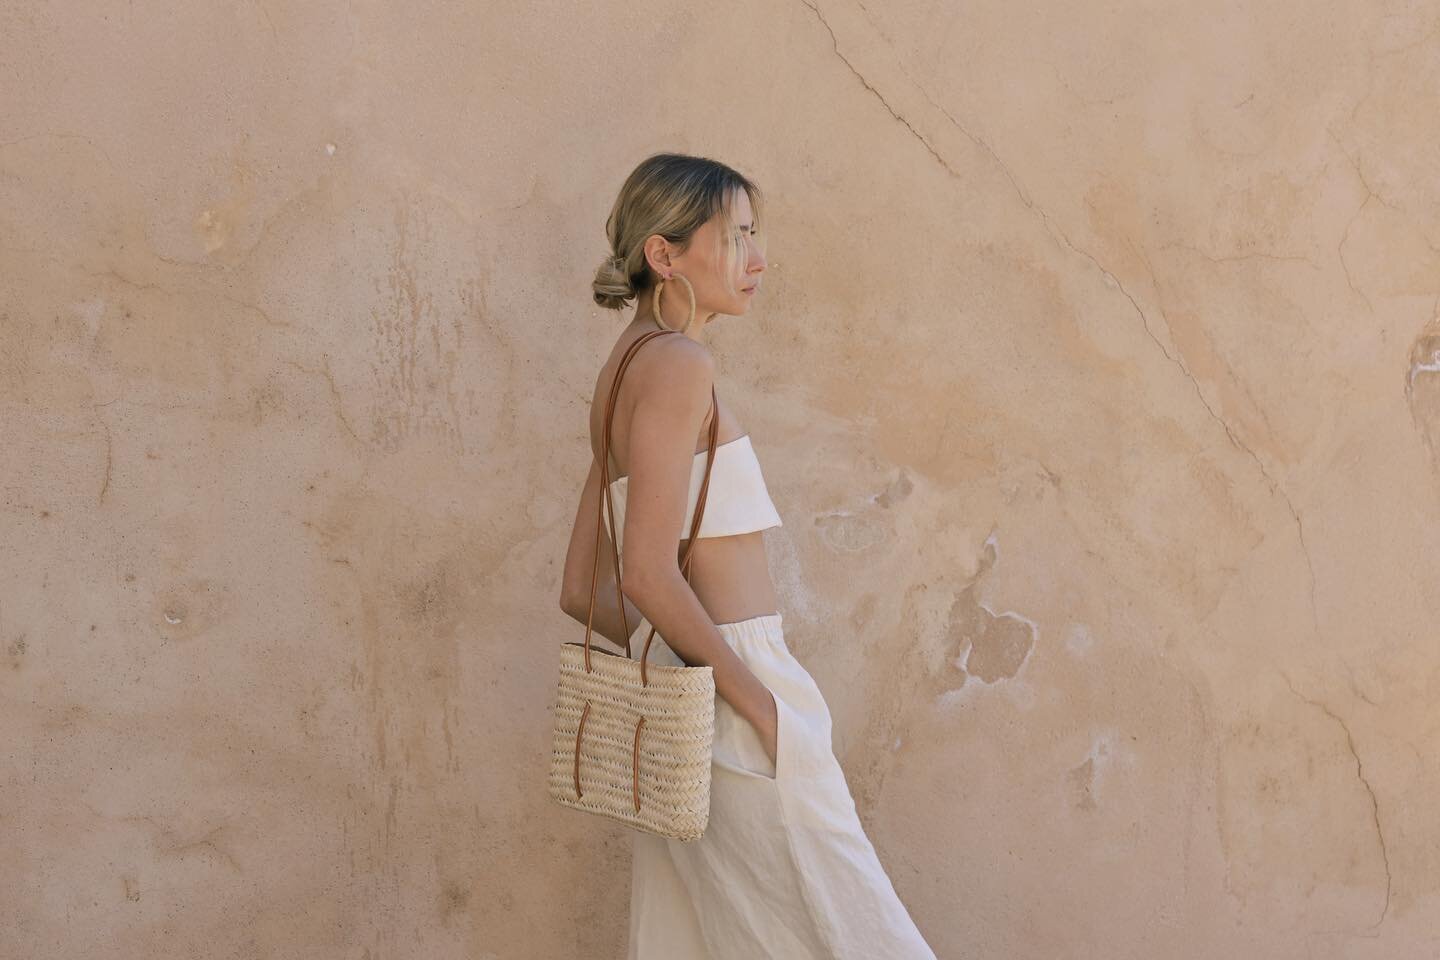 Maria Long Natural 🌱 

Made with palm leaves, collected and dried in the Mediterranean sun. These are braided with our traditional technique transmitted through generations until today.

#santapalma #bags #madeinspain